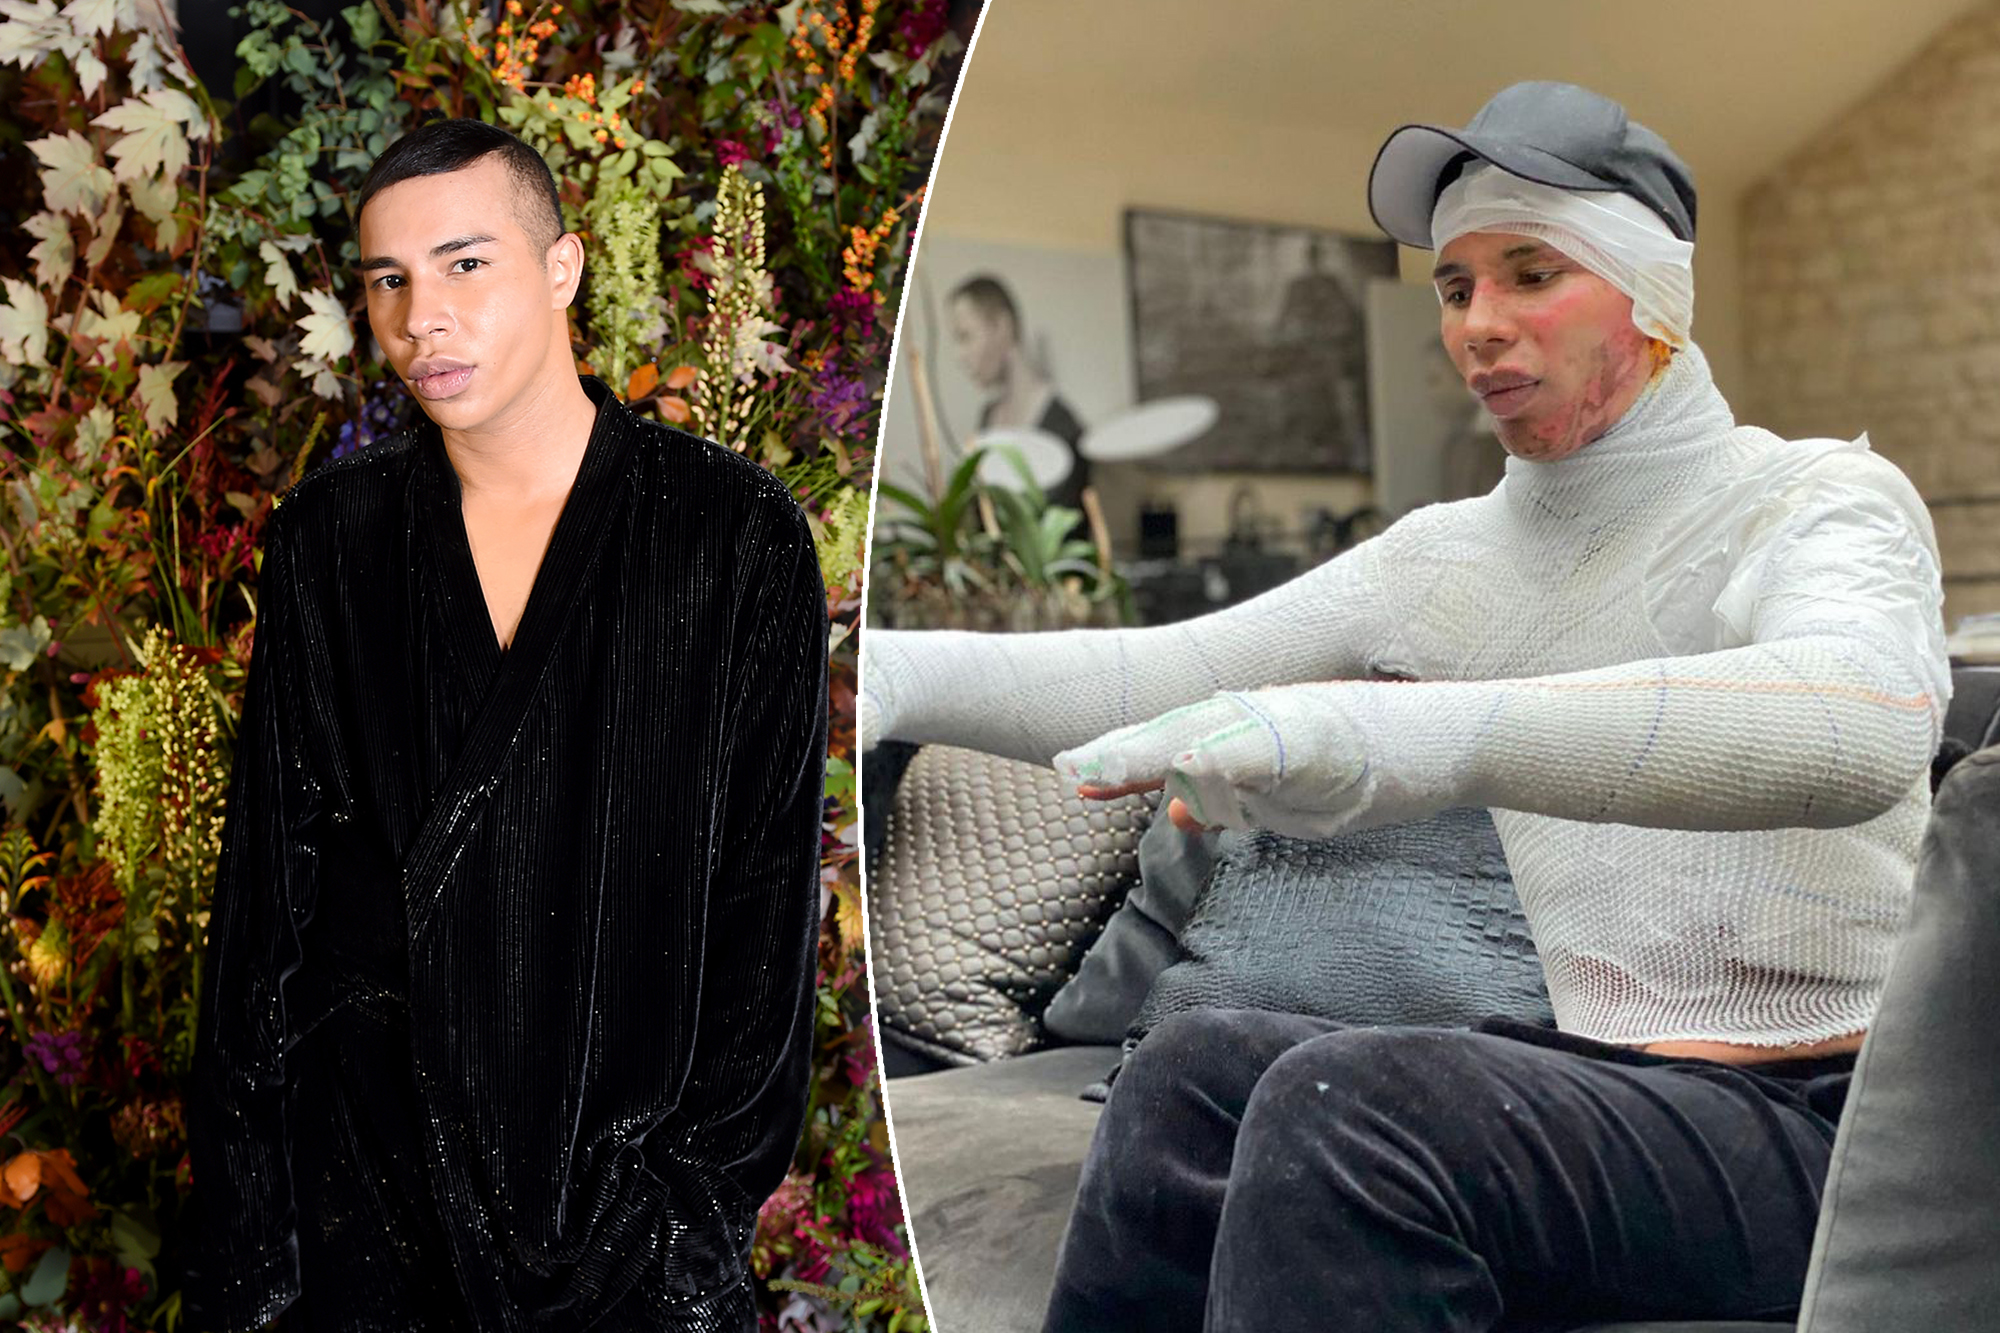 Olivier Rousteing revealed his gruesome injuries. (Source: Page Six)